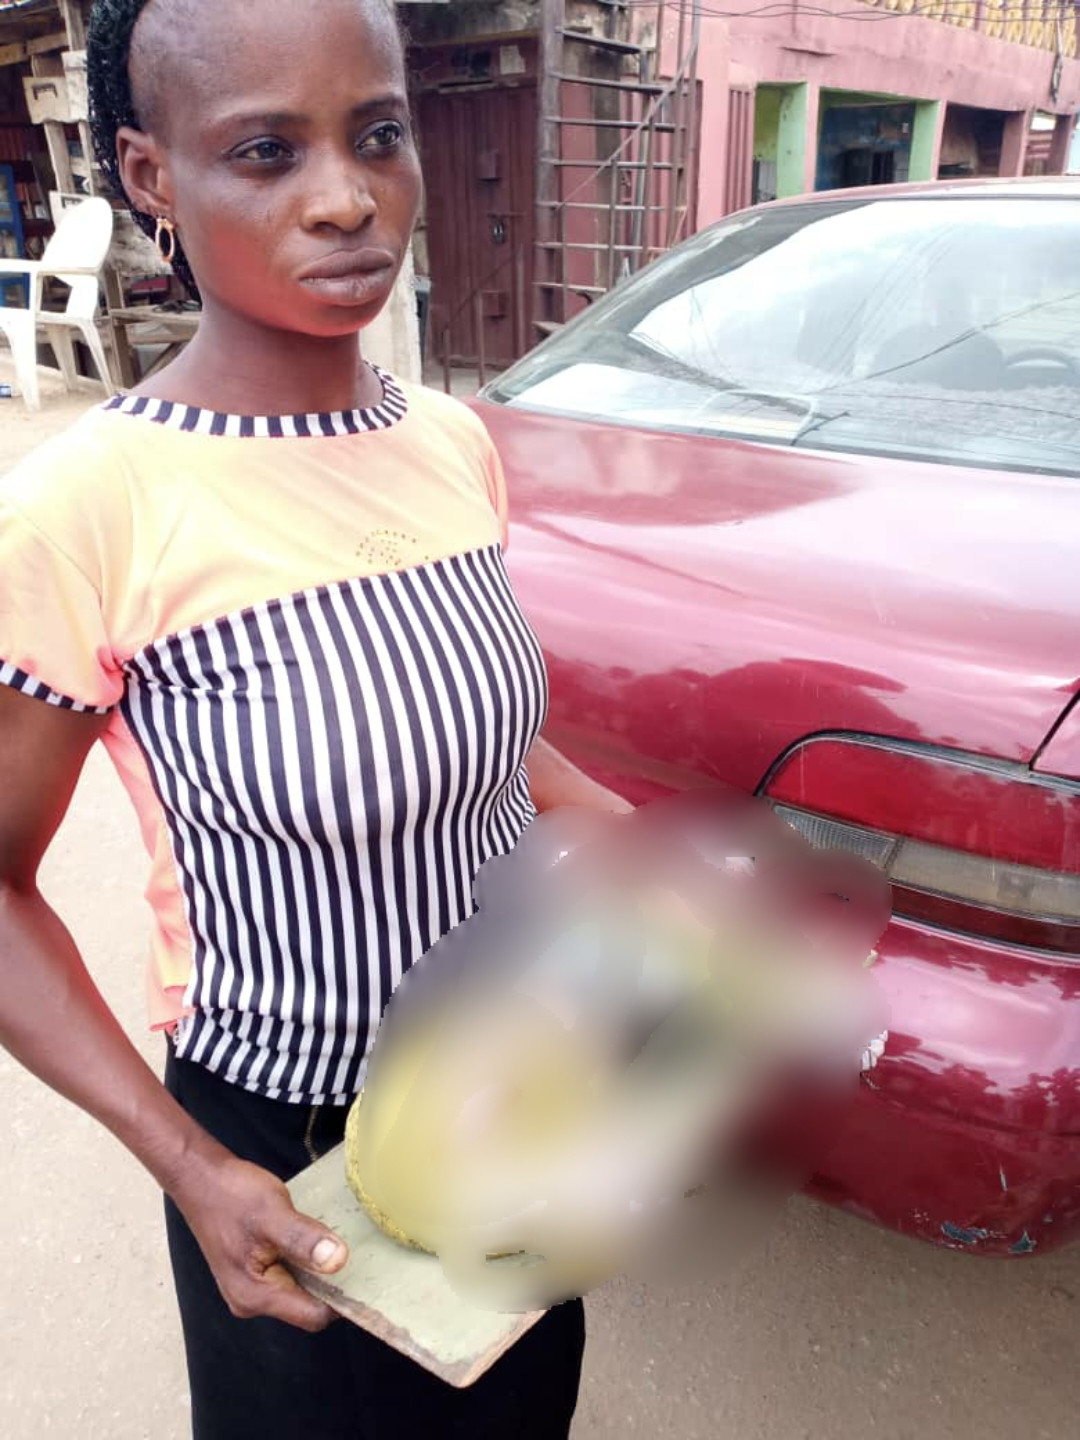 Woman arrested for killing her one month baby; blames her baby daddy  (photo)